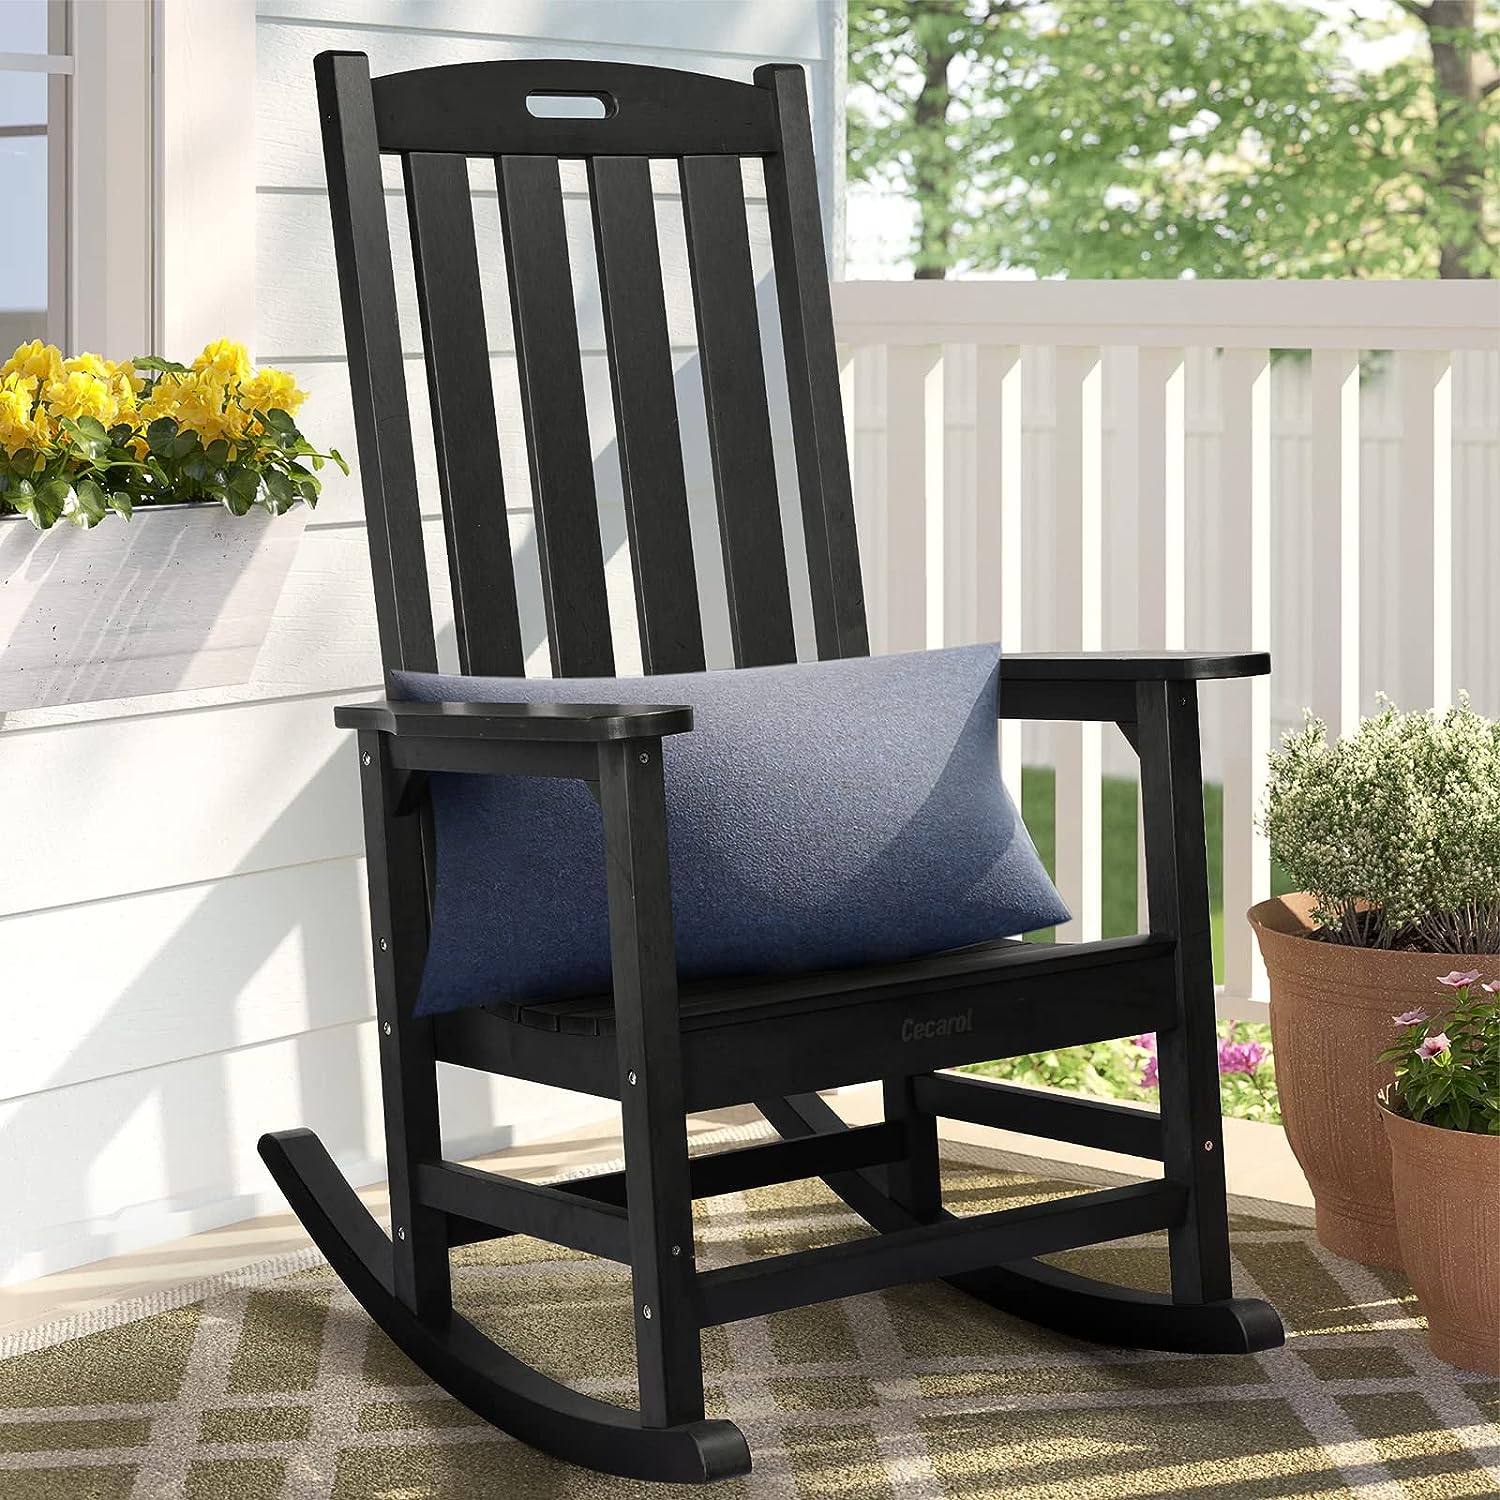 https://bigbigmart.com/wp-content/uploads/2023/08/Cecarol-Patio-Oversized-Rocking-Chair-Outdoor-Weather-Resistant-Low-Maintenance-High-Back-Front-Porch-Rocker-Chairs-385lbs-Support-Poly-Lumber-Rocker..-1.jpg